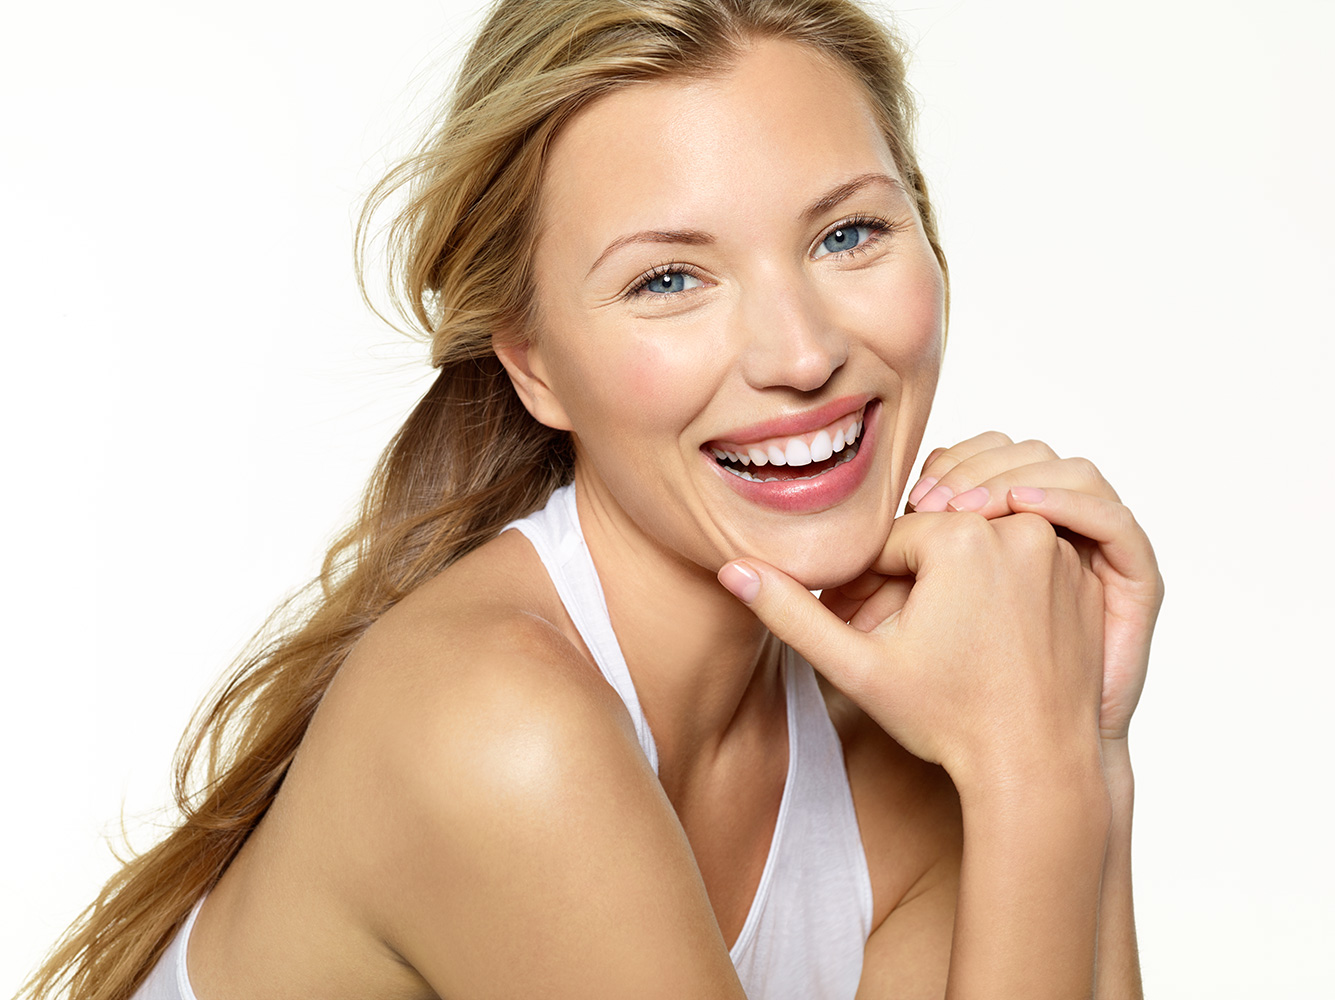 10 Habits of Women with Beautiful Skin that You Should Start Doing Too (Obviously!)